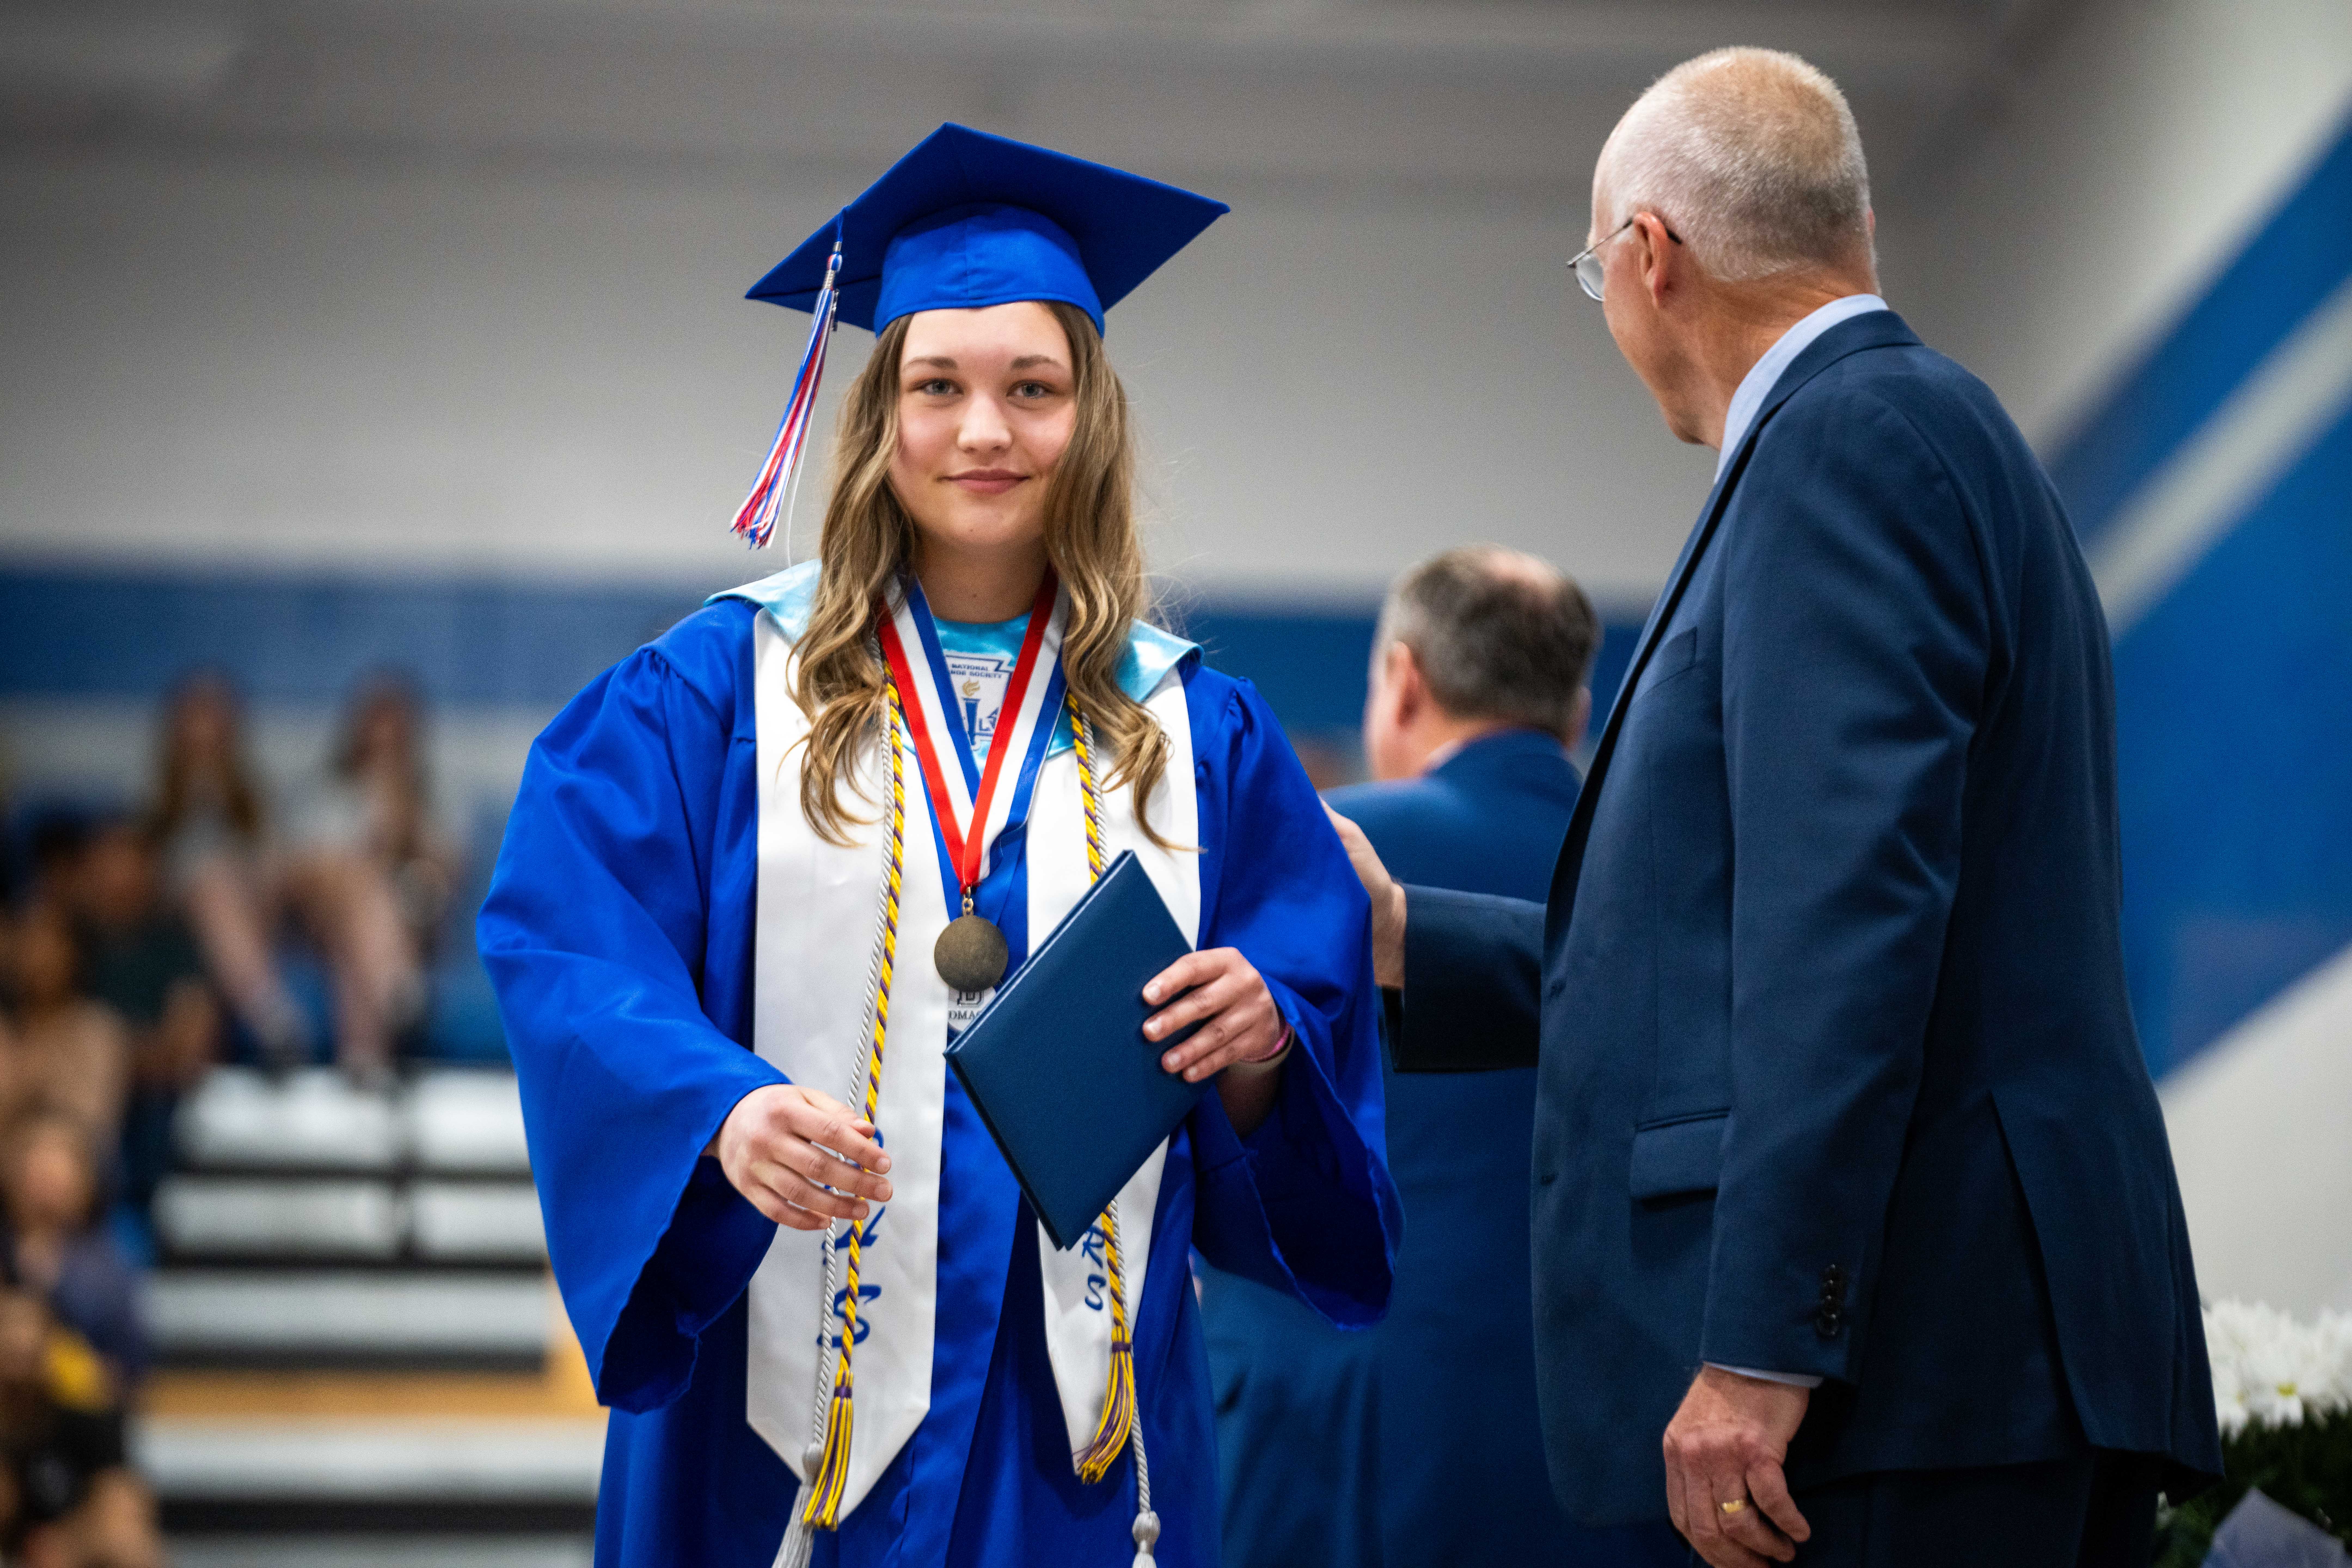 Riley and Wuebker graduate twice, from Perry High School and DMACC